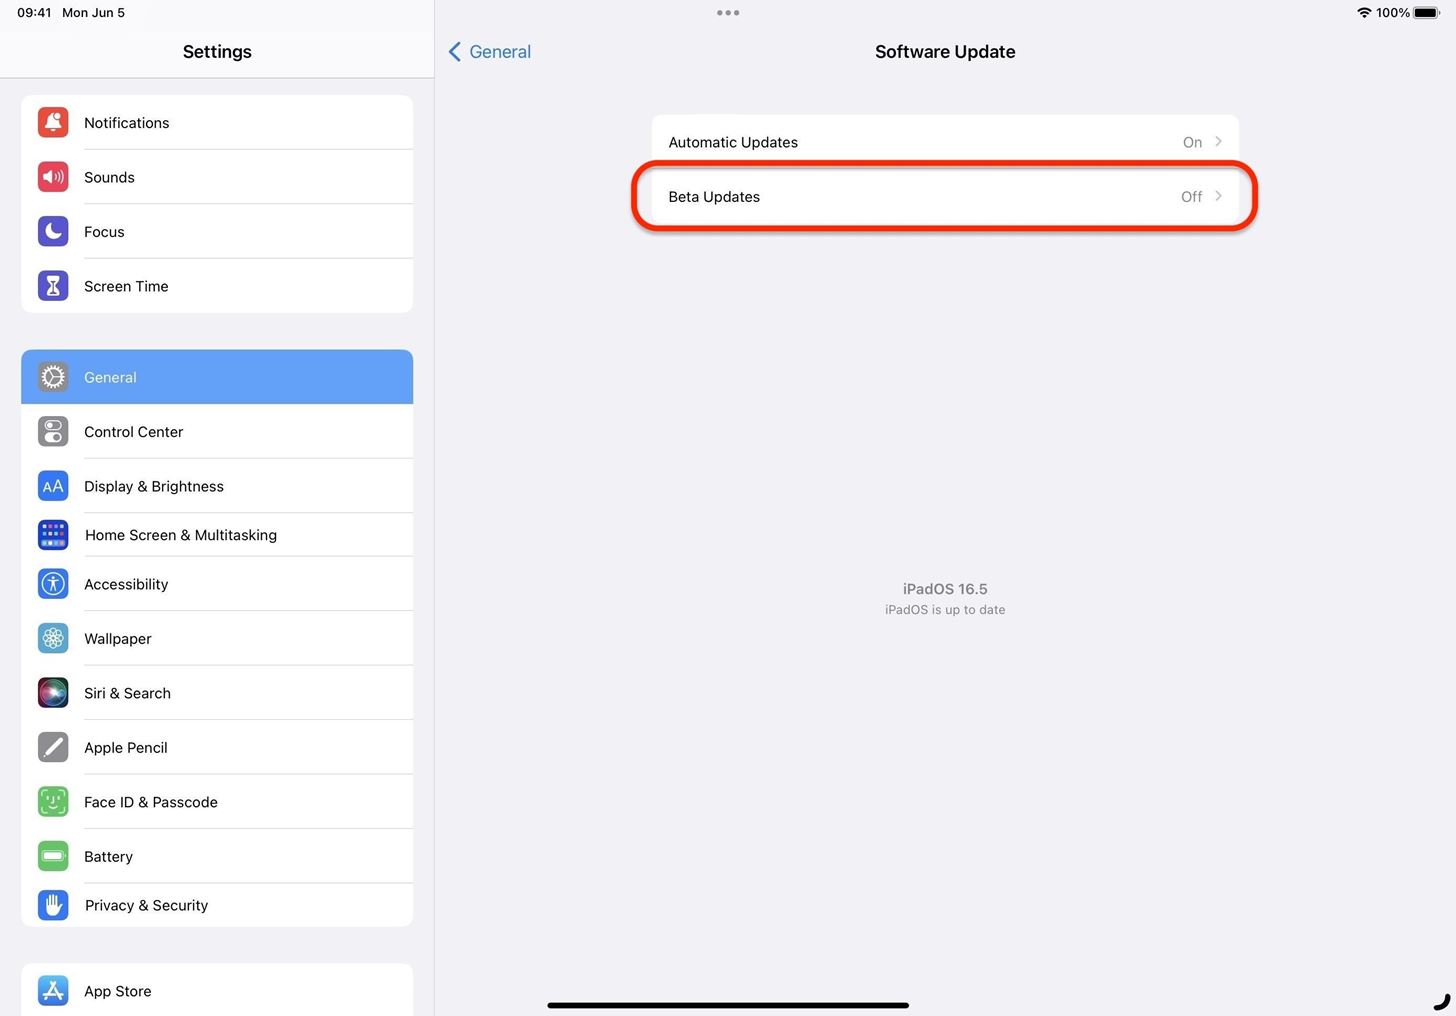 How to Download and Install iPadOS 17.2 Beta to Try New iPad Features Before Everyone Else